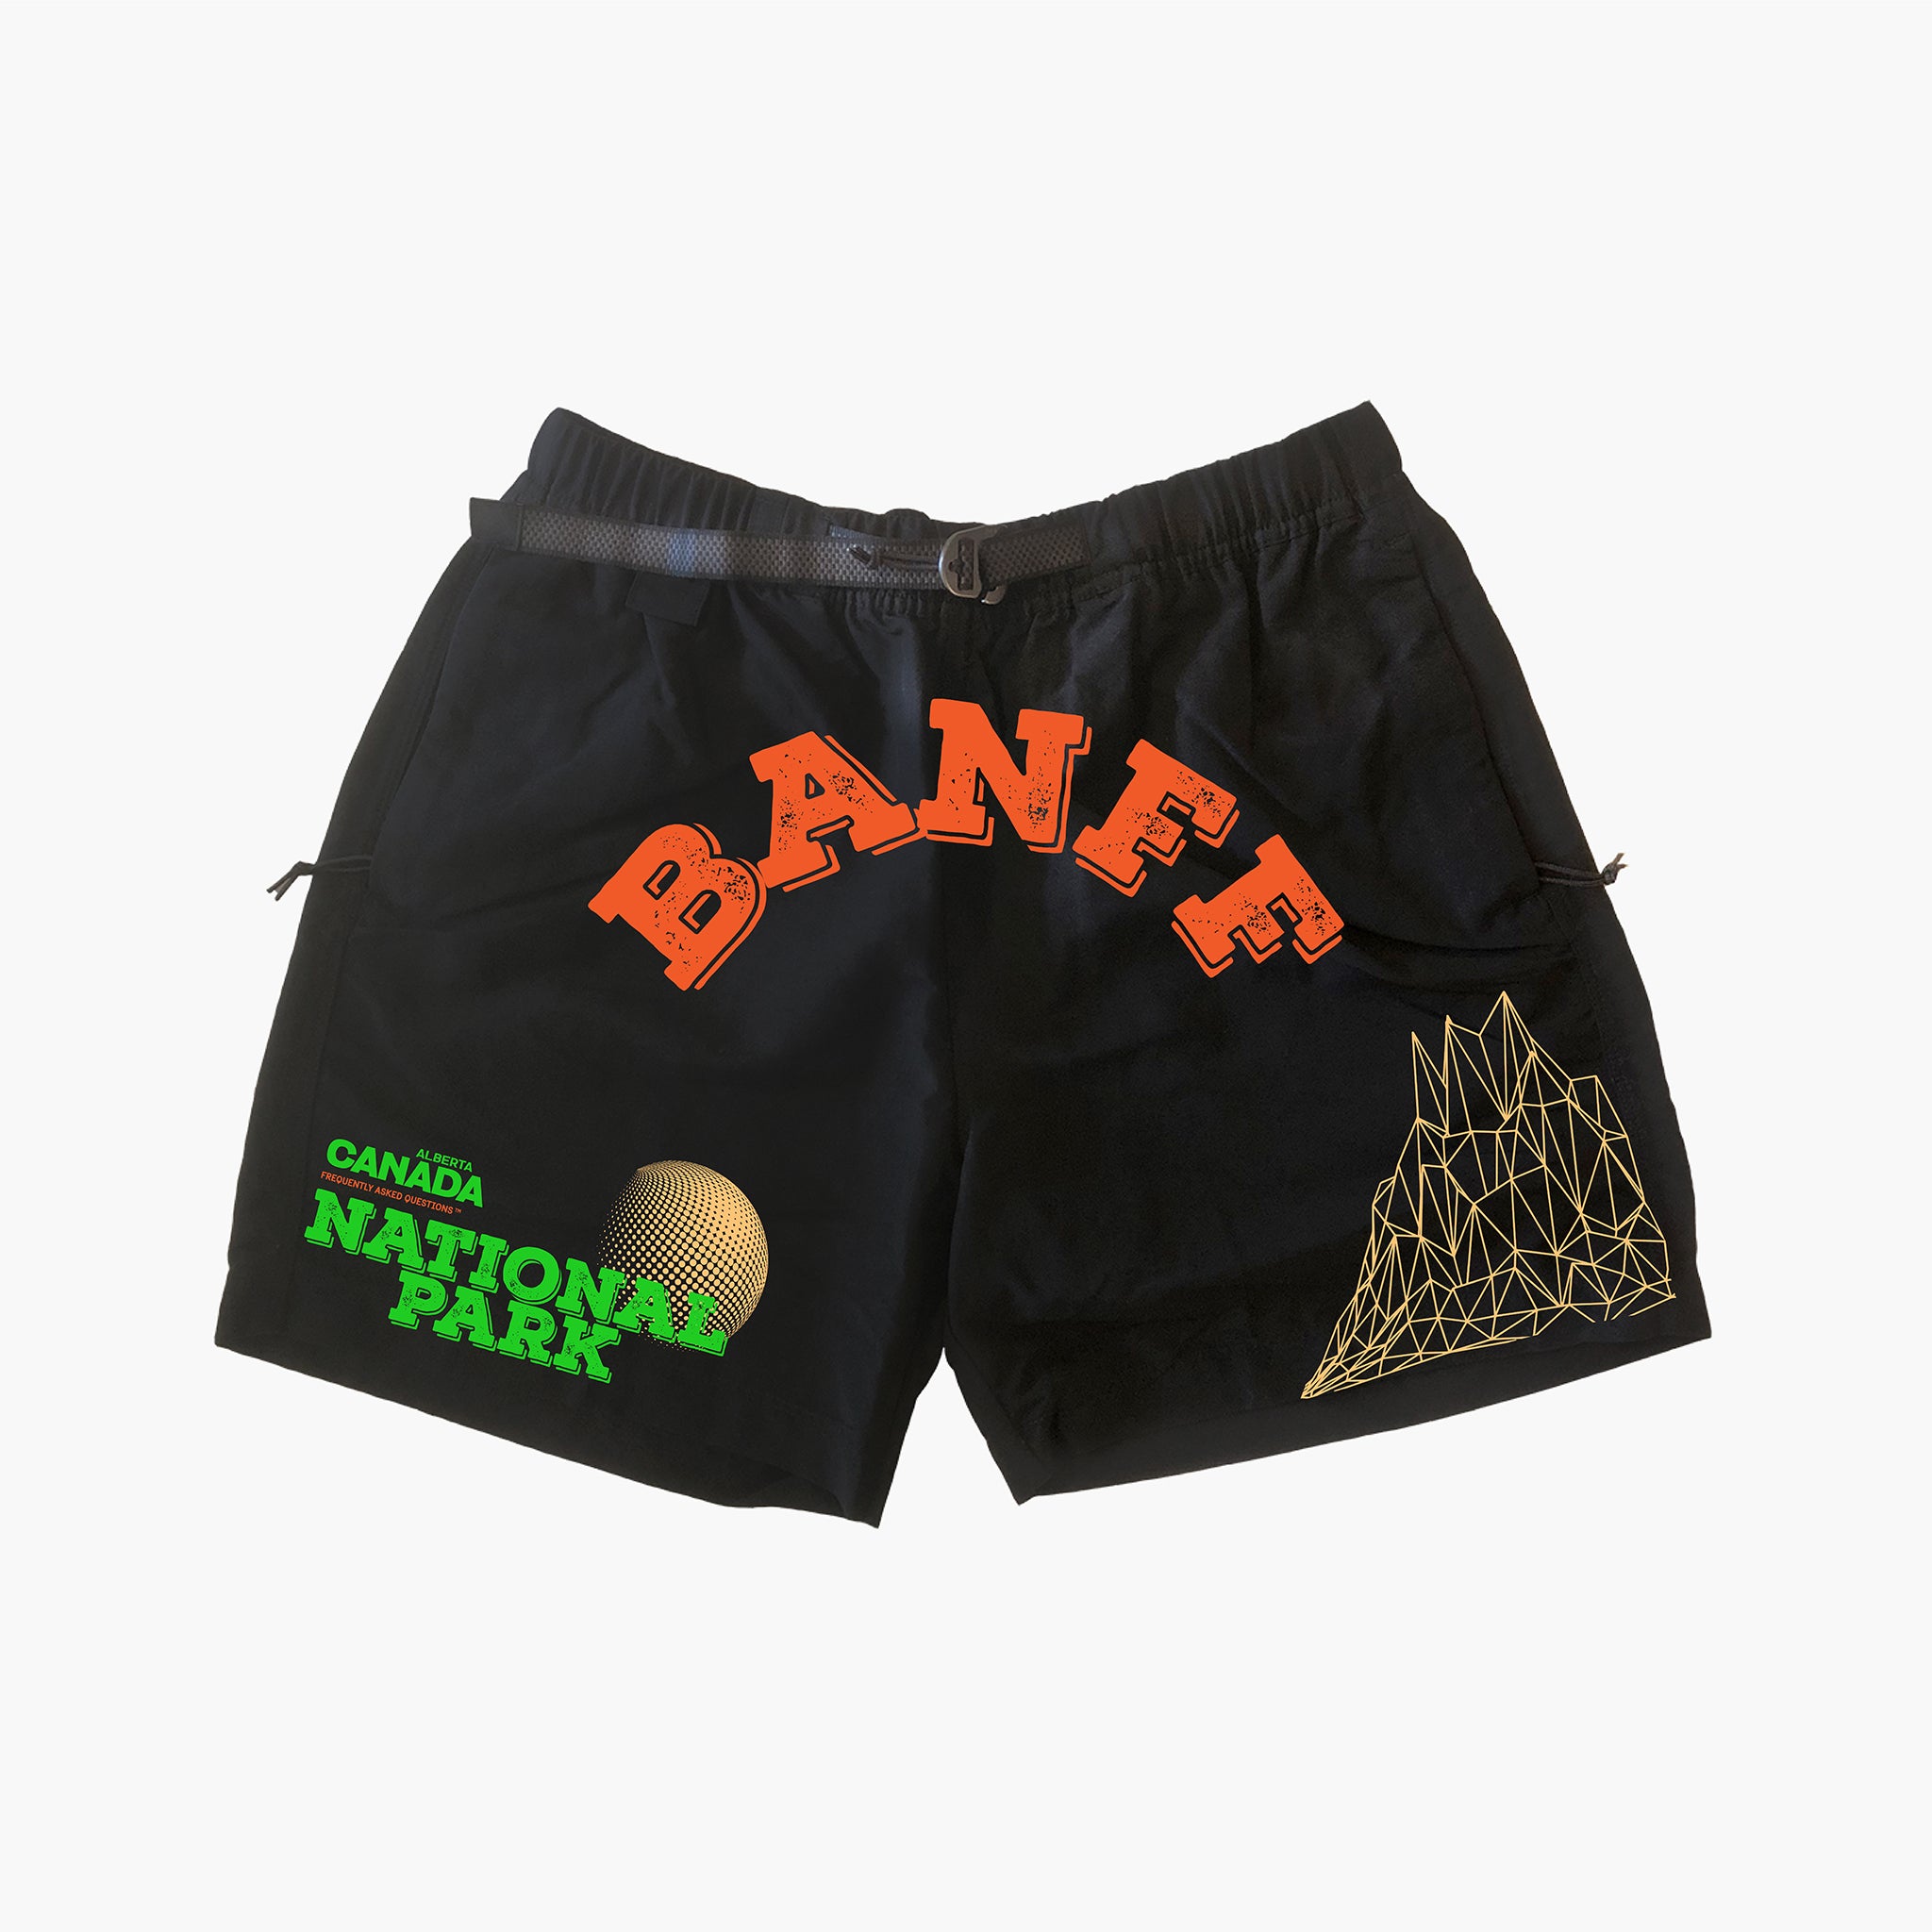 BANFF Nylon Shorts - Frequently Asked Questions